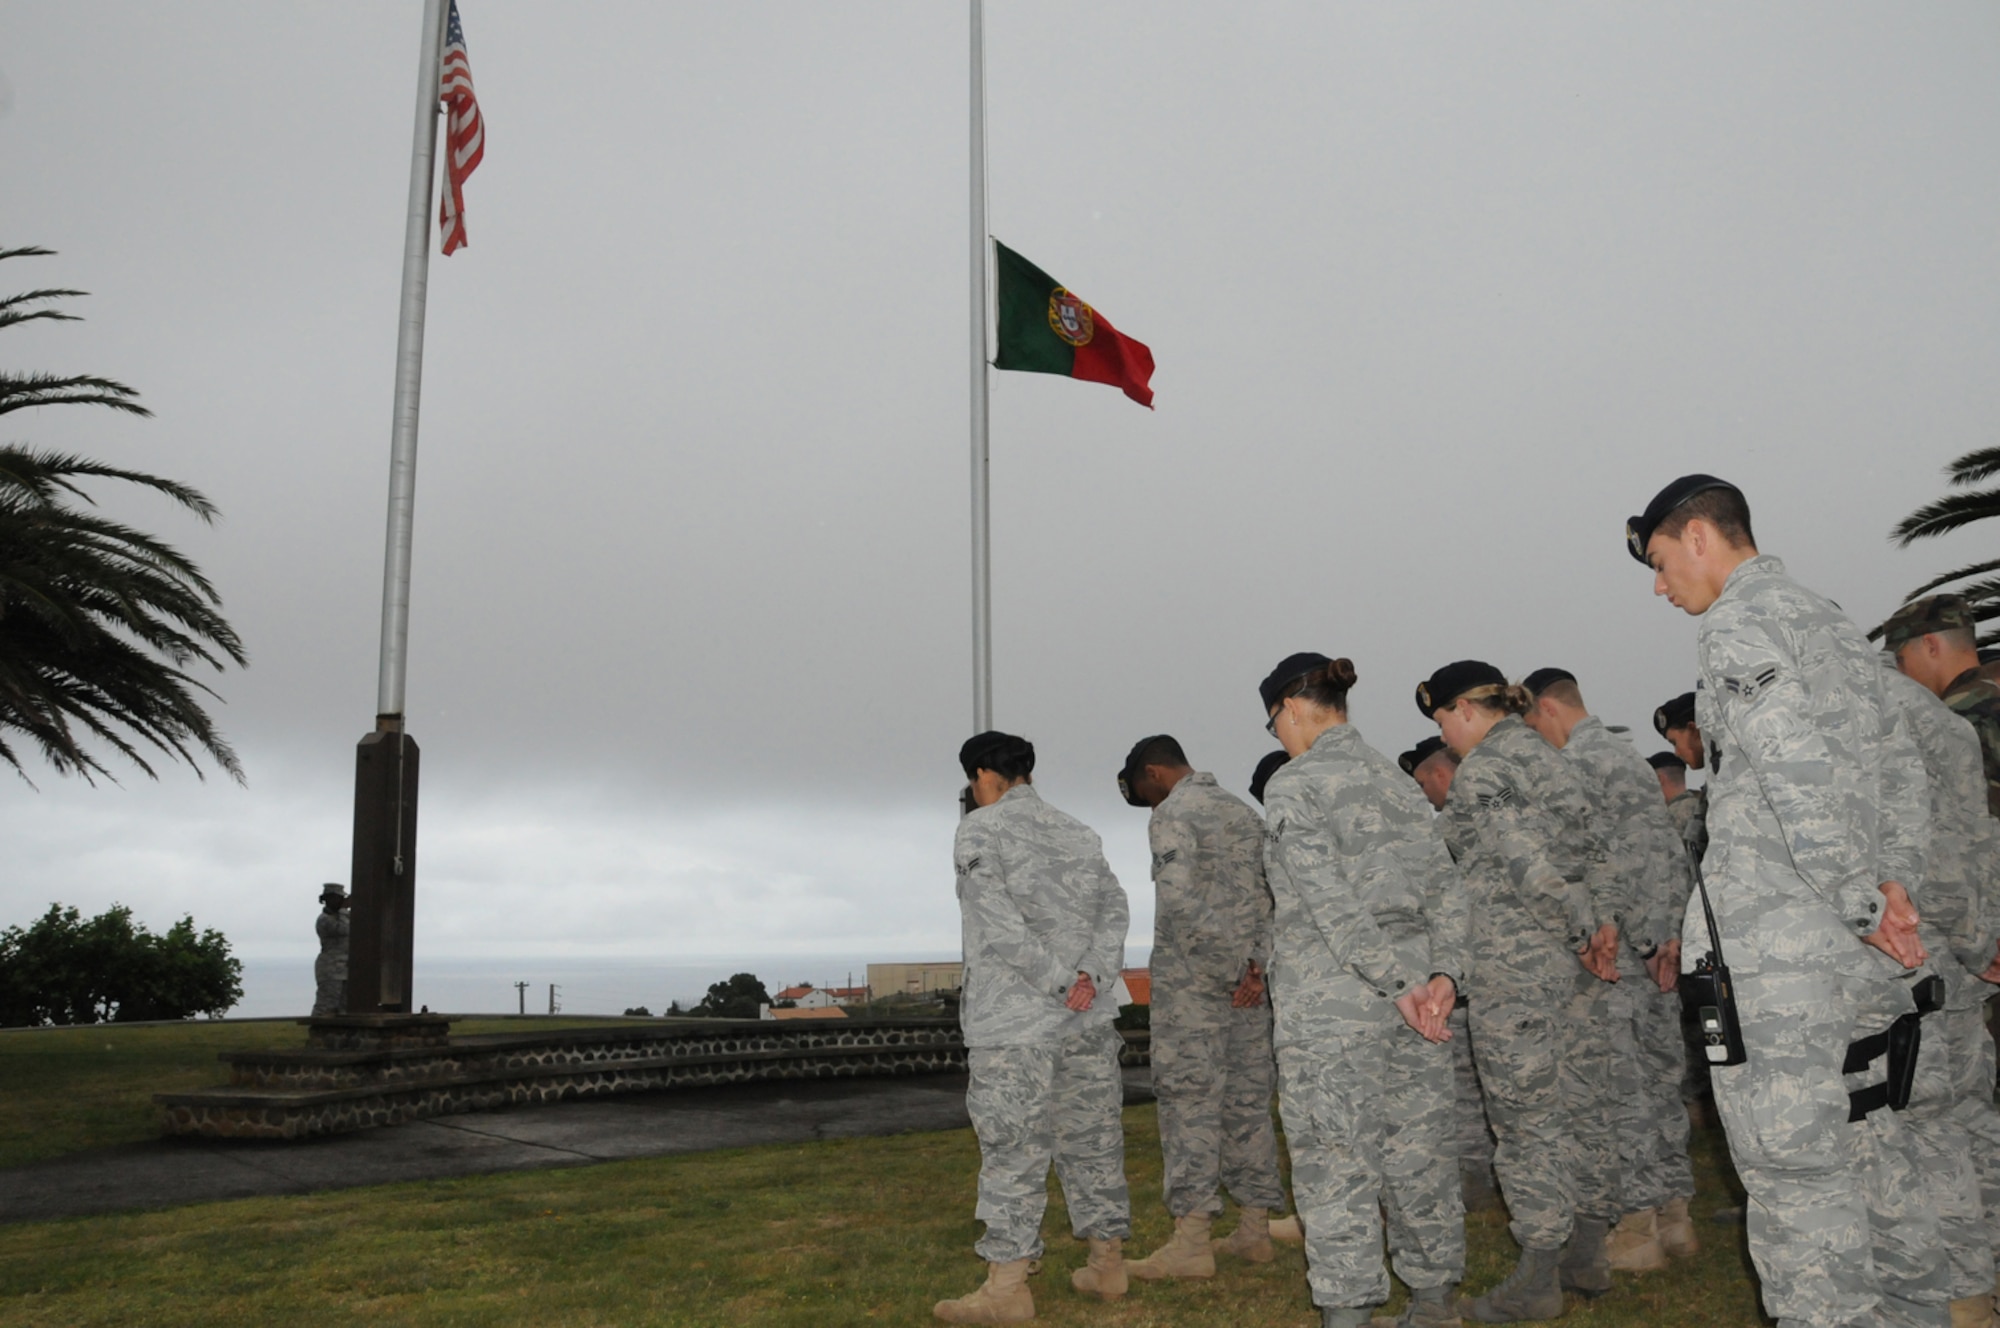 Members of the 65th Security Forces Squadron, at Lajes Field, observe a moment of silence as the American and Portuguese flags are flown half staff in honor of Senior Airman Amber Finell, 65th Security Forces Squadron, at Lajes Field, July 2.  Airman Finnell is from East Tawas, Mich. and entered the Air Force in Feb. 2004.  She had been previously stationed at Minot AFB, N.D. and Sather AB, Baghdad, Iraq; she passed away on June 30, 2009.  (U.S. Air Force photo by Tech Sgt. Rebecca F. Corey)